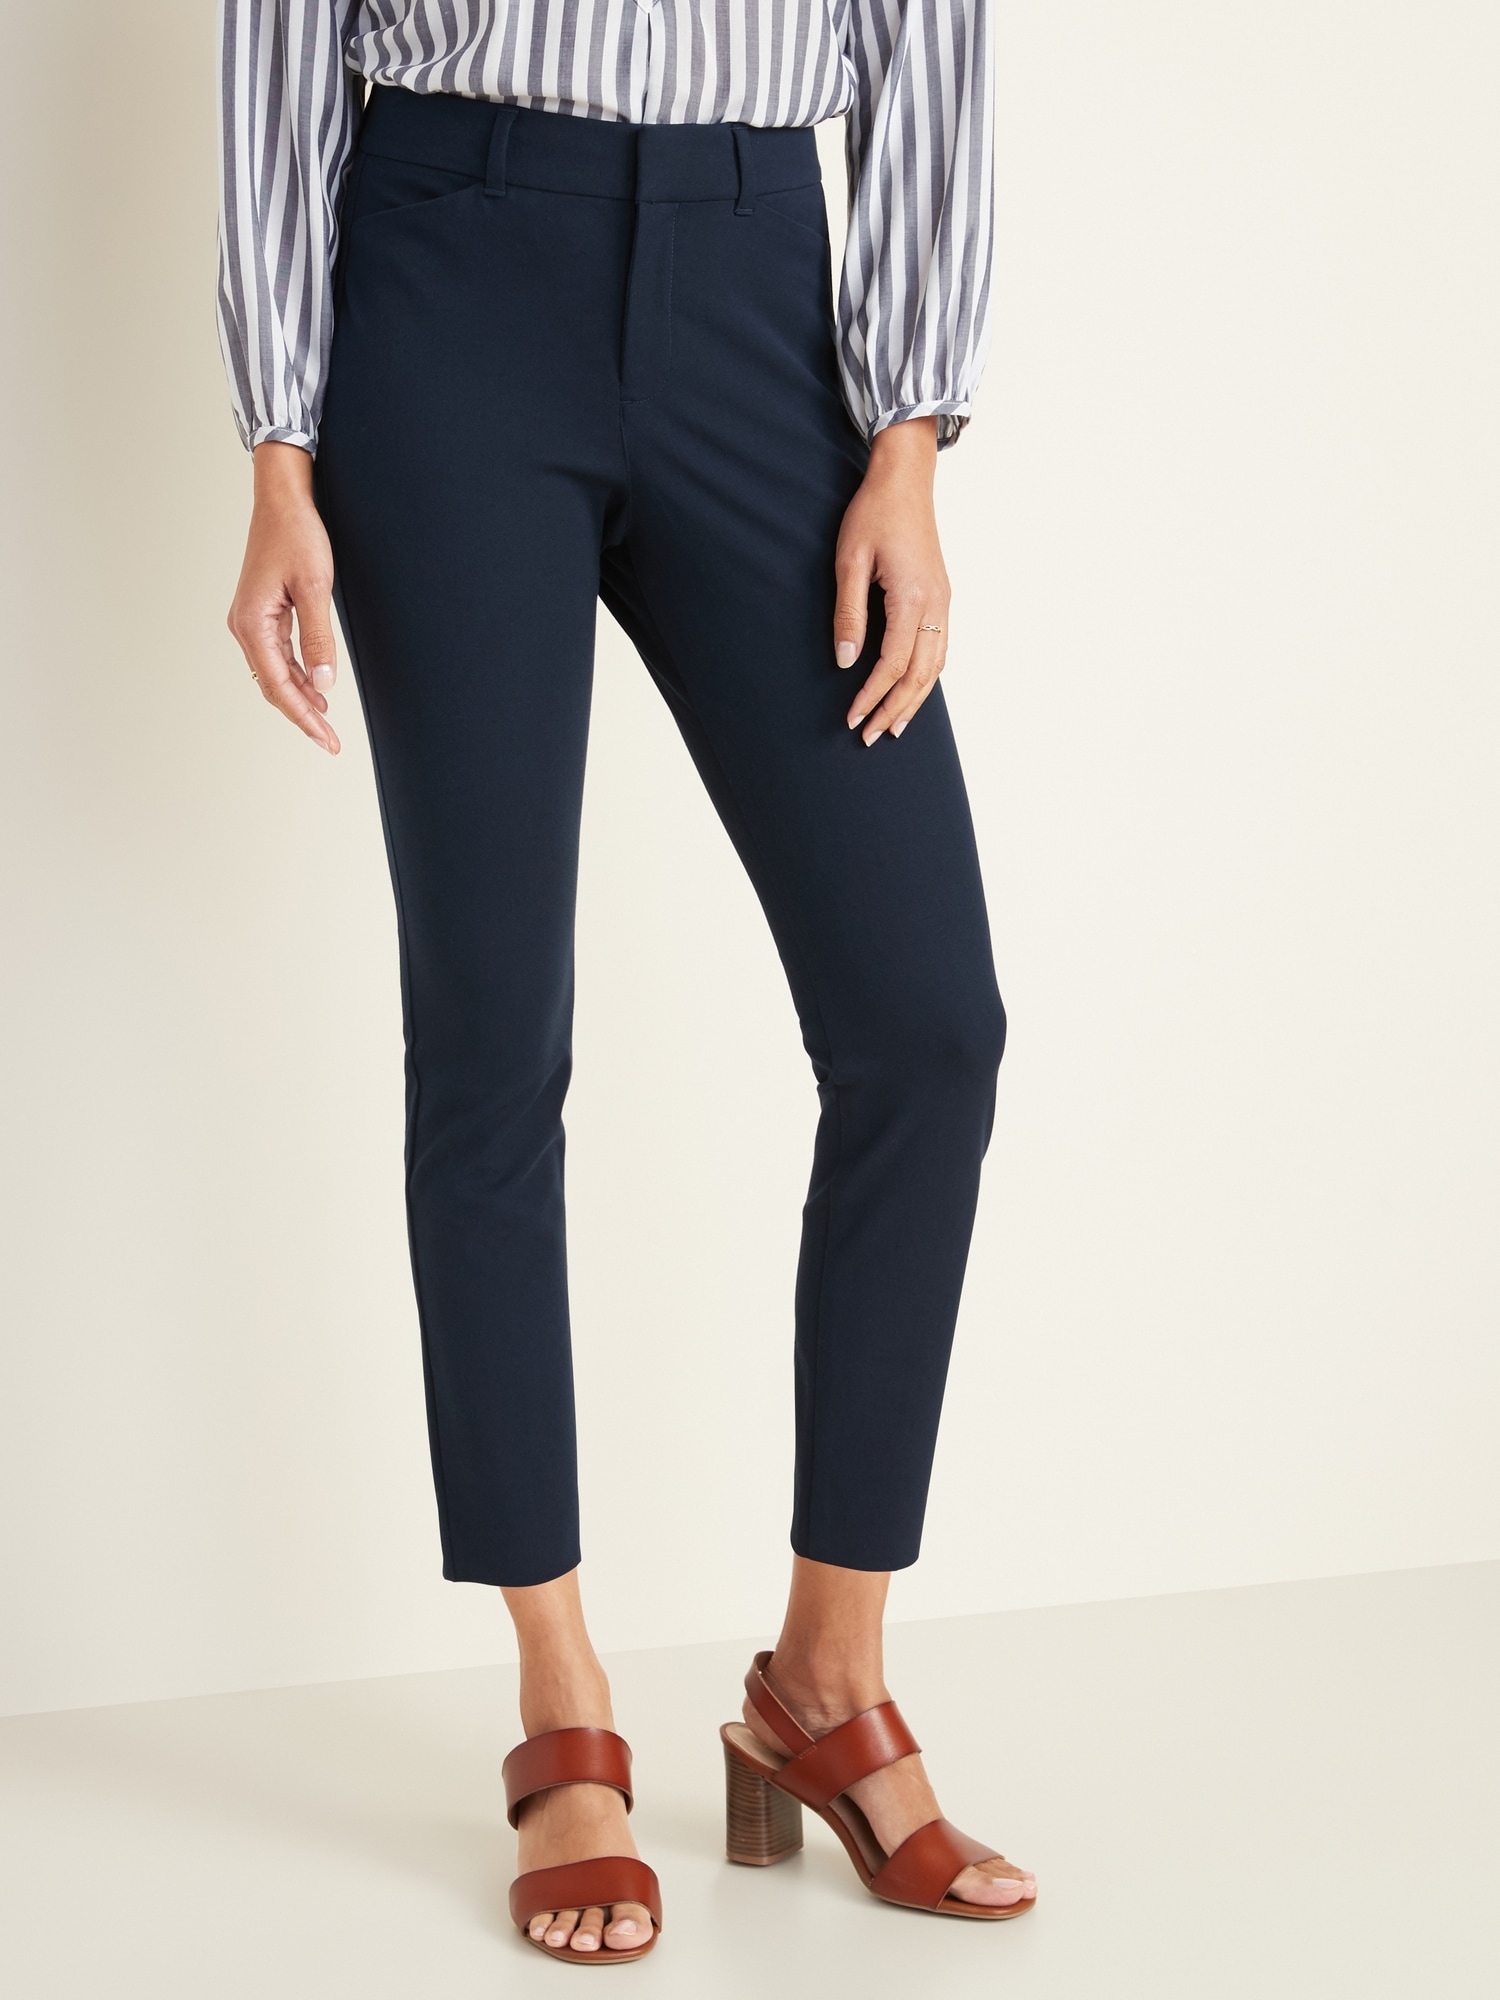 All-New High-Waisted Pixie Ankle Pants for Women | Old Navy